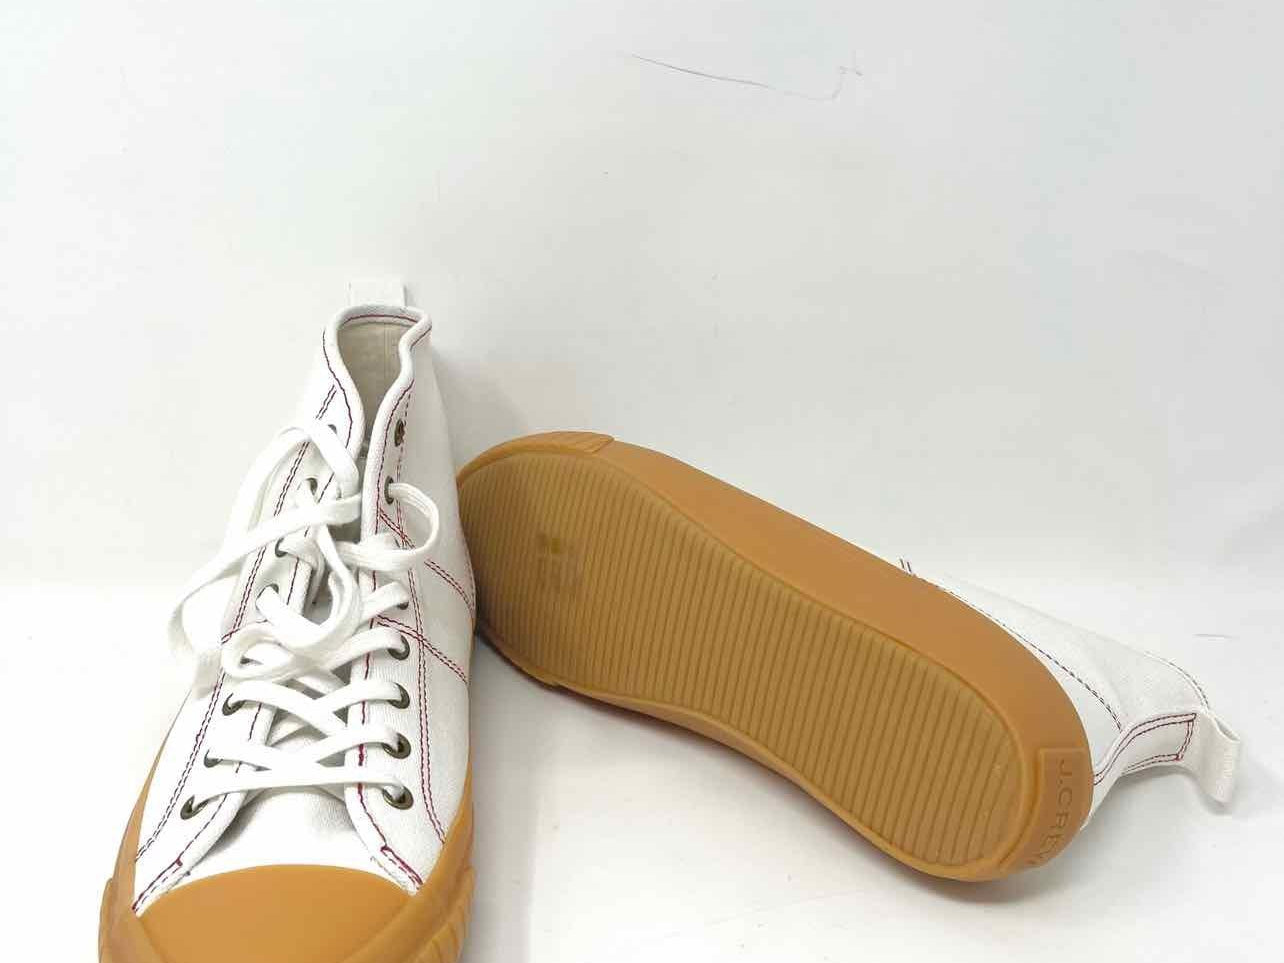 J Crew Women's white/tan Hi-top Canvas Rubber Stitched Size 8.5 Sneakers - Article Consignment